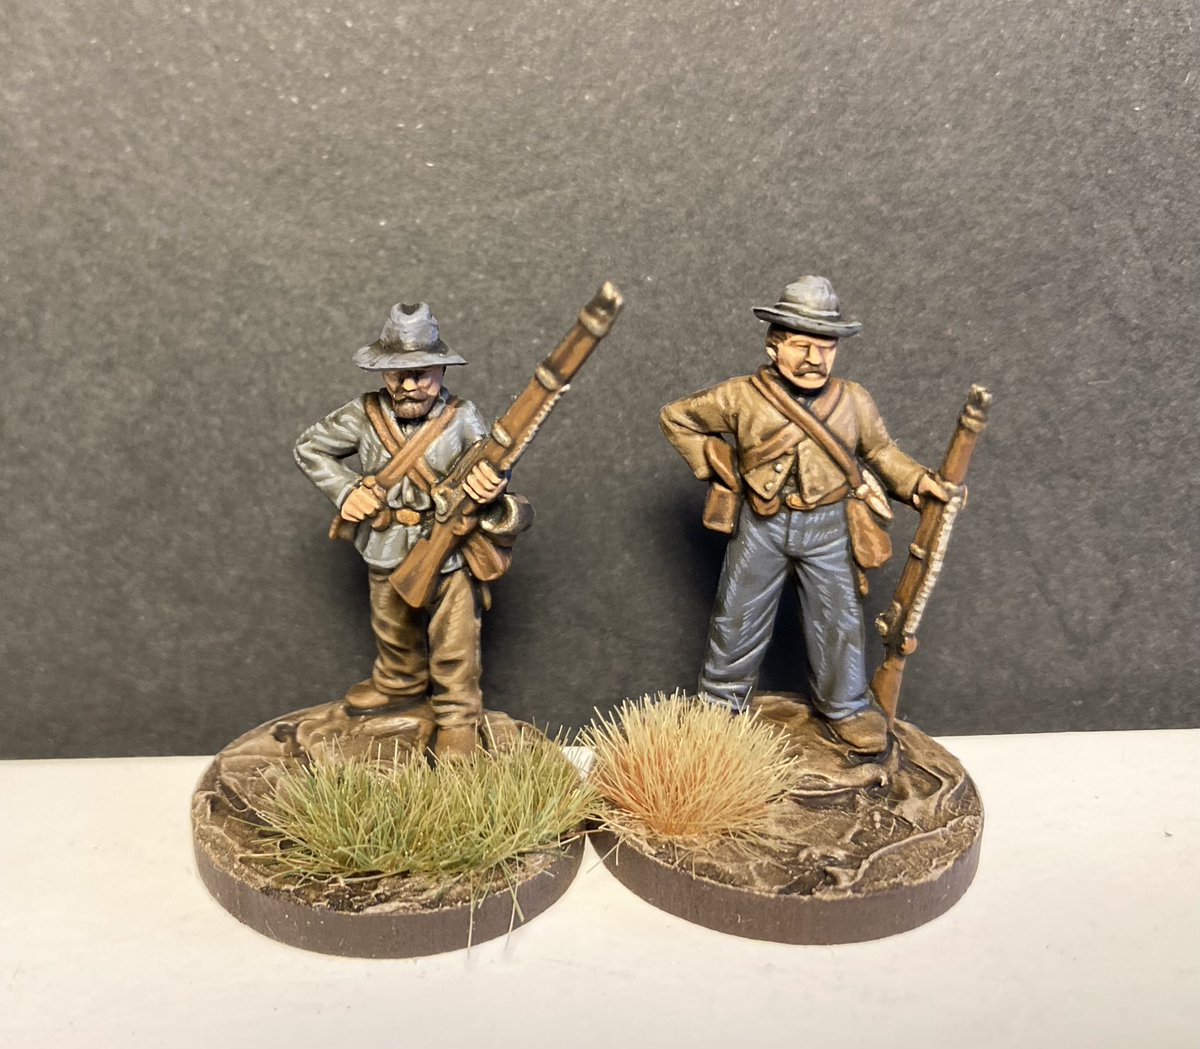 Testing Agrax alternatives on some Perry ACW. New Agrax, old, and the Two Thin Coats “Battlemud Wash”. All varnished with AK ultra matte. New Agrax still too shiny, Battlemud is a recommend! #wepaintminis #Warmongers #wargaming #miniaturepainting #28mm #spreadthelard